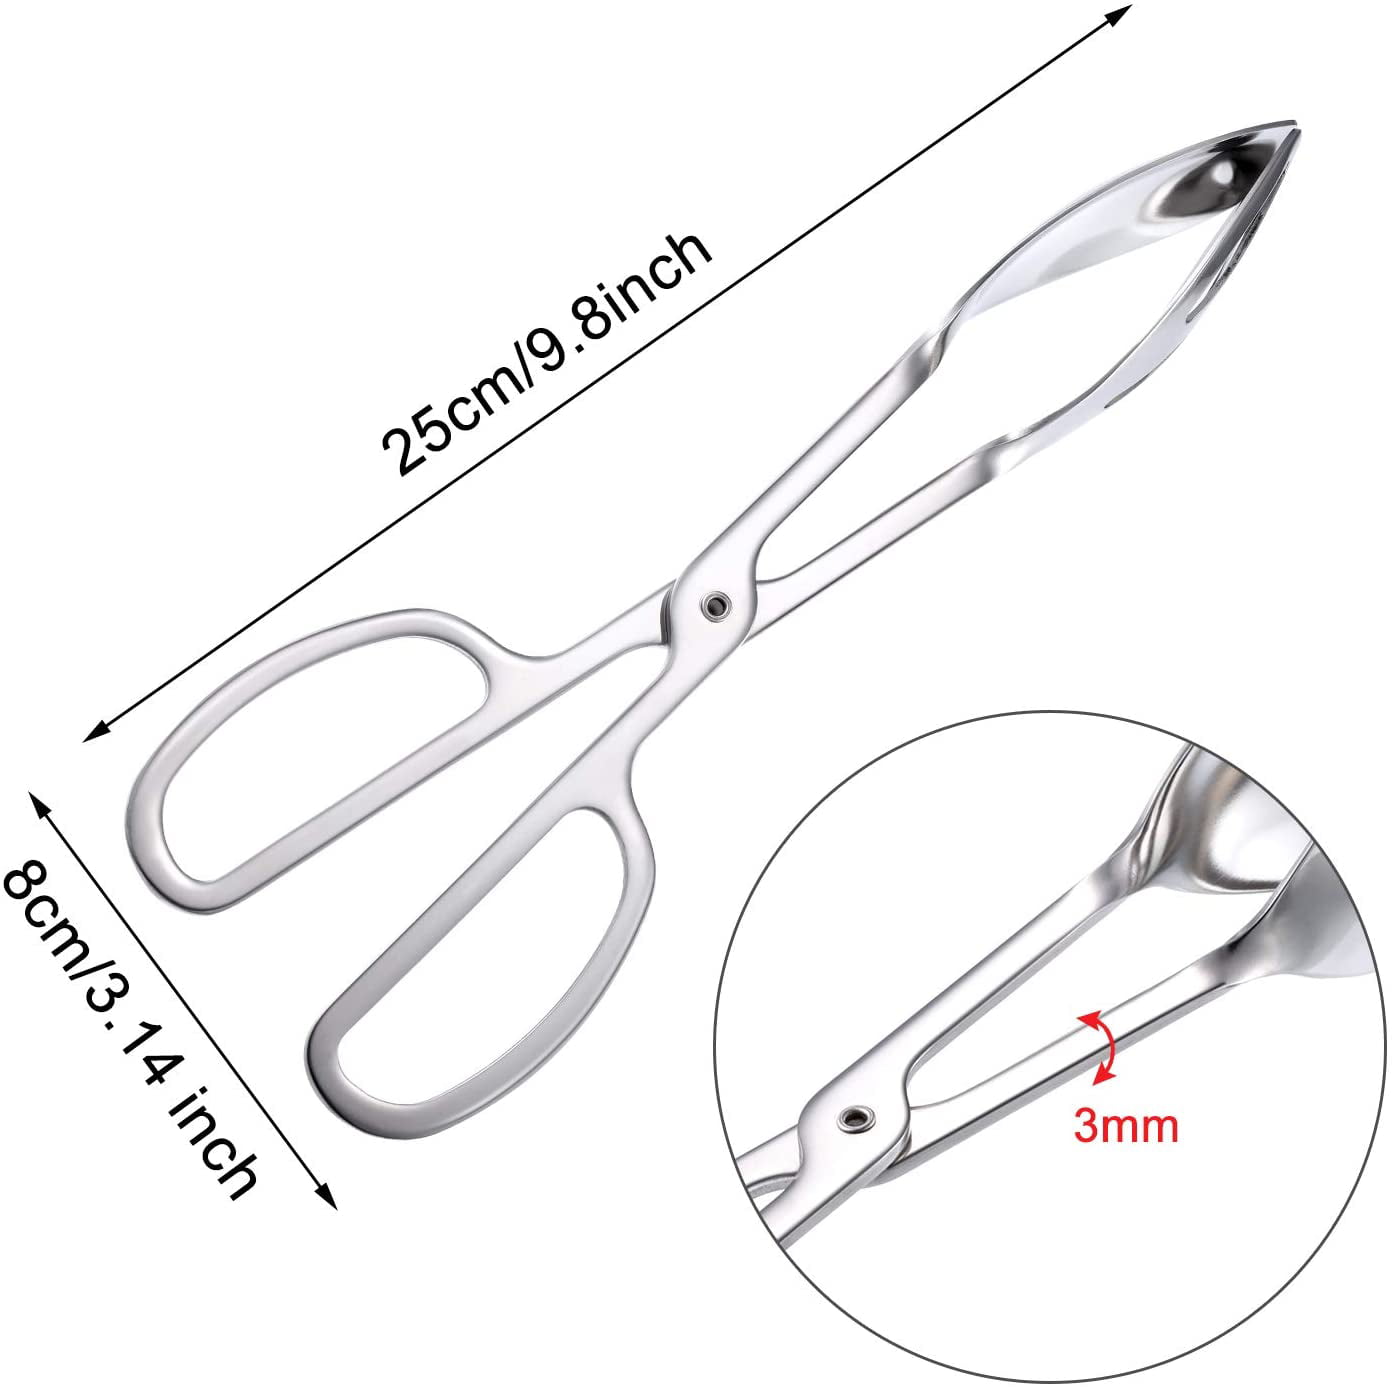 Salad Tongs,Pack of 2 Thickening Stainless Steel Serving Tongs Scissor Tongs Buffet Party Catering Serving TongsCake Tongs Bread Tongs Chafing Dish Tongs Kitchen Tongs